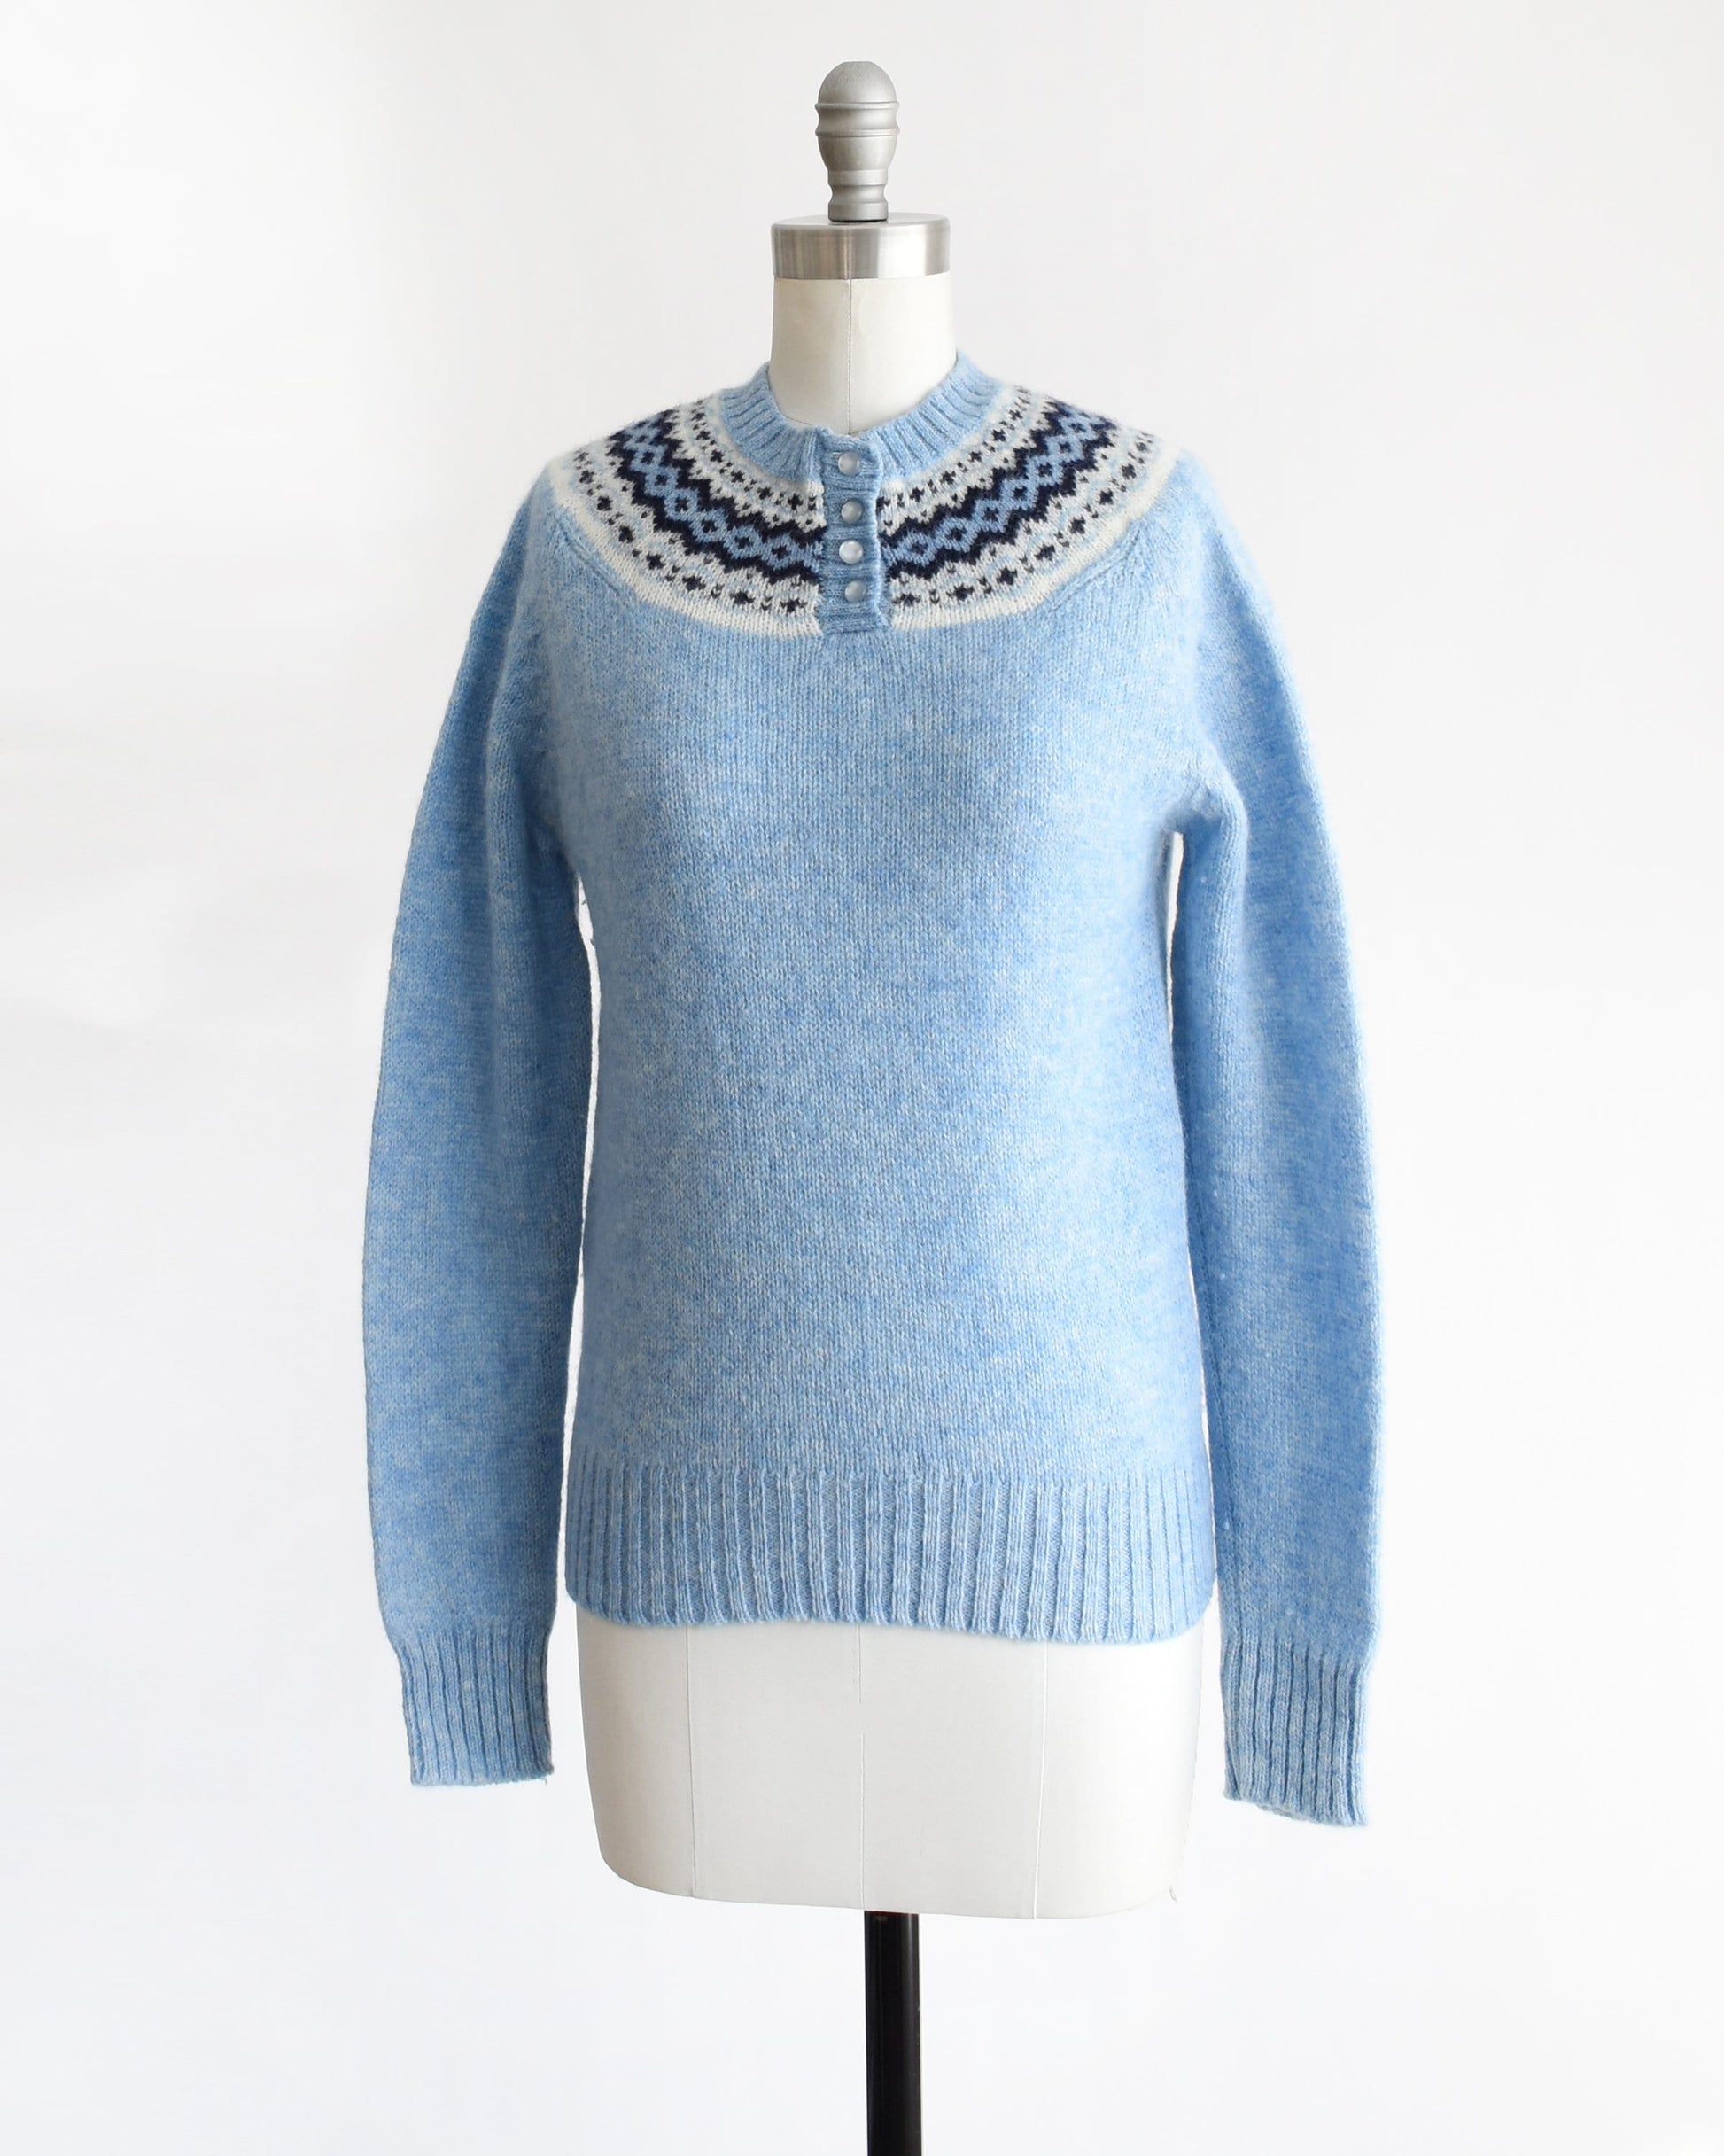 Side front view of a vintage 80s blue sweater with a fair isle pattern around the collar and 4 buttons down the front. The sweater is modeled on a dress form.